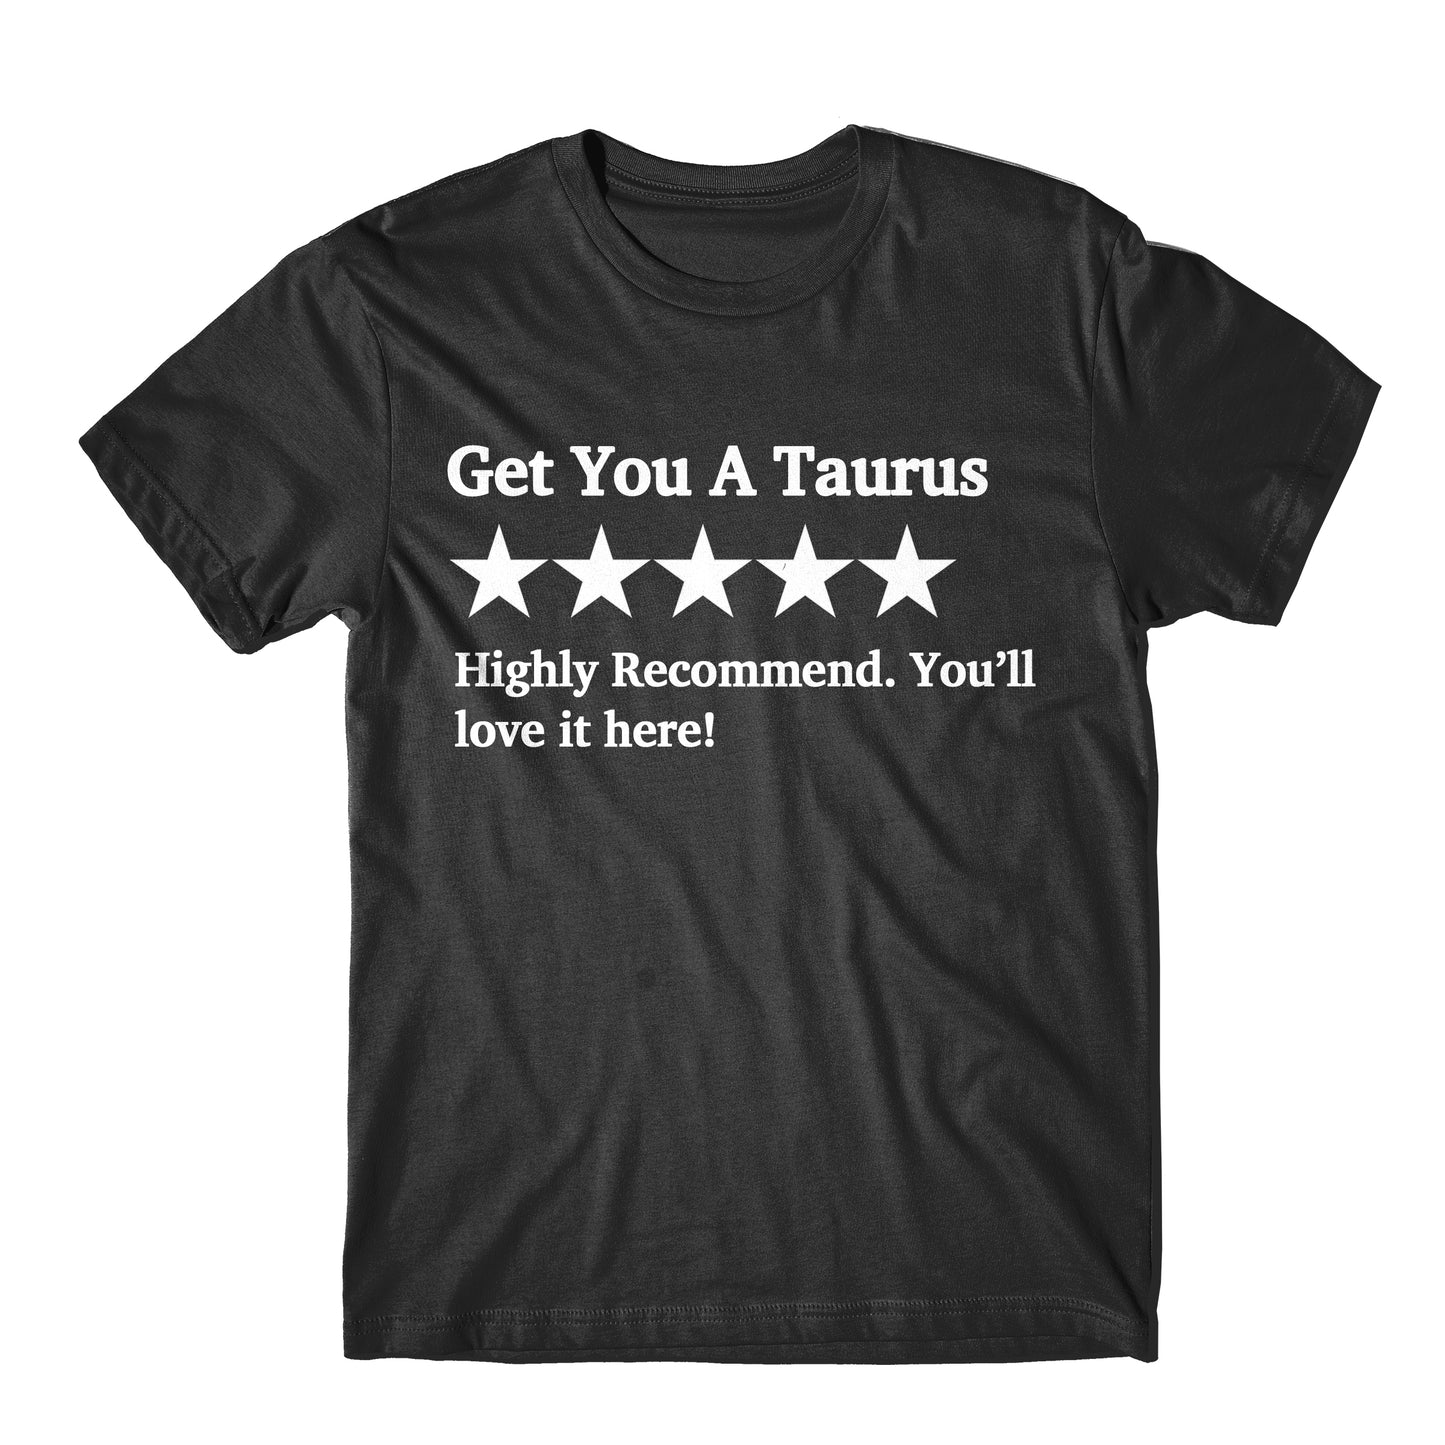 "Get You A Taurus Five Star Rating" Tee